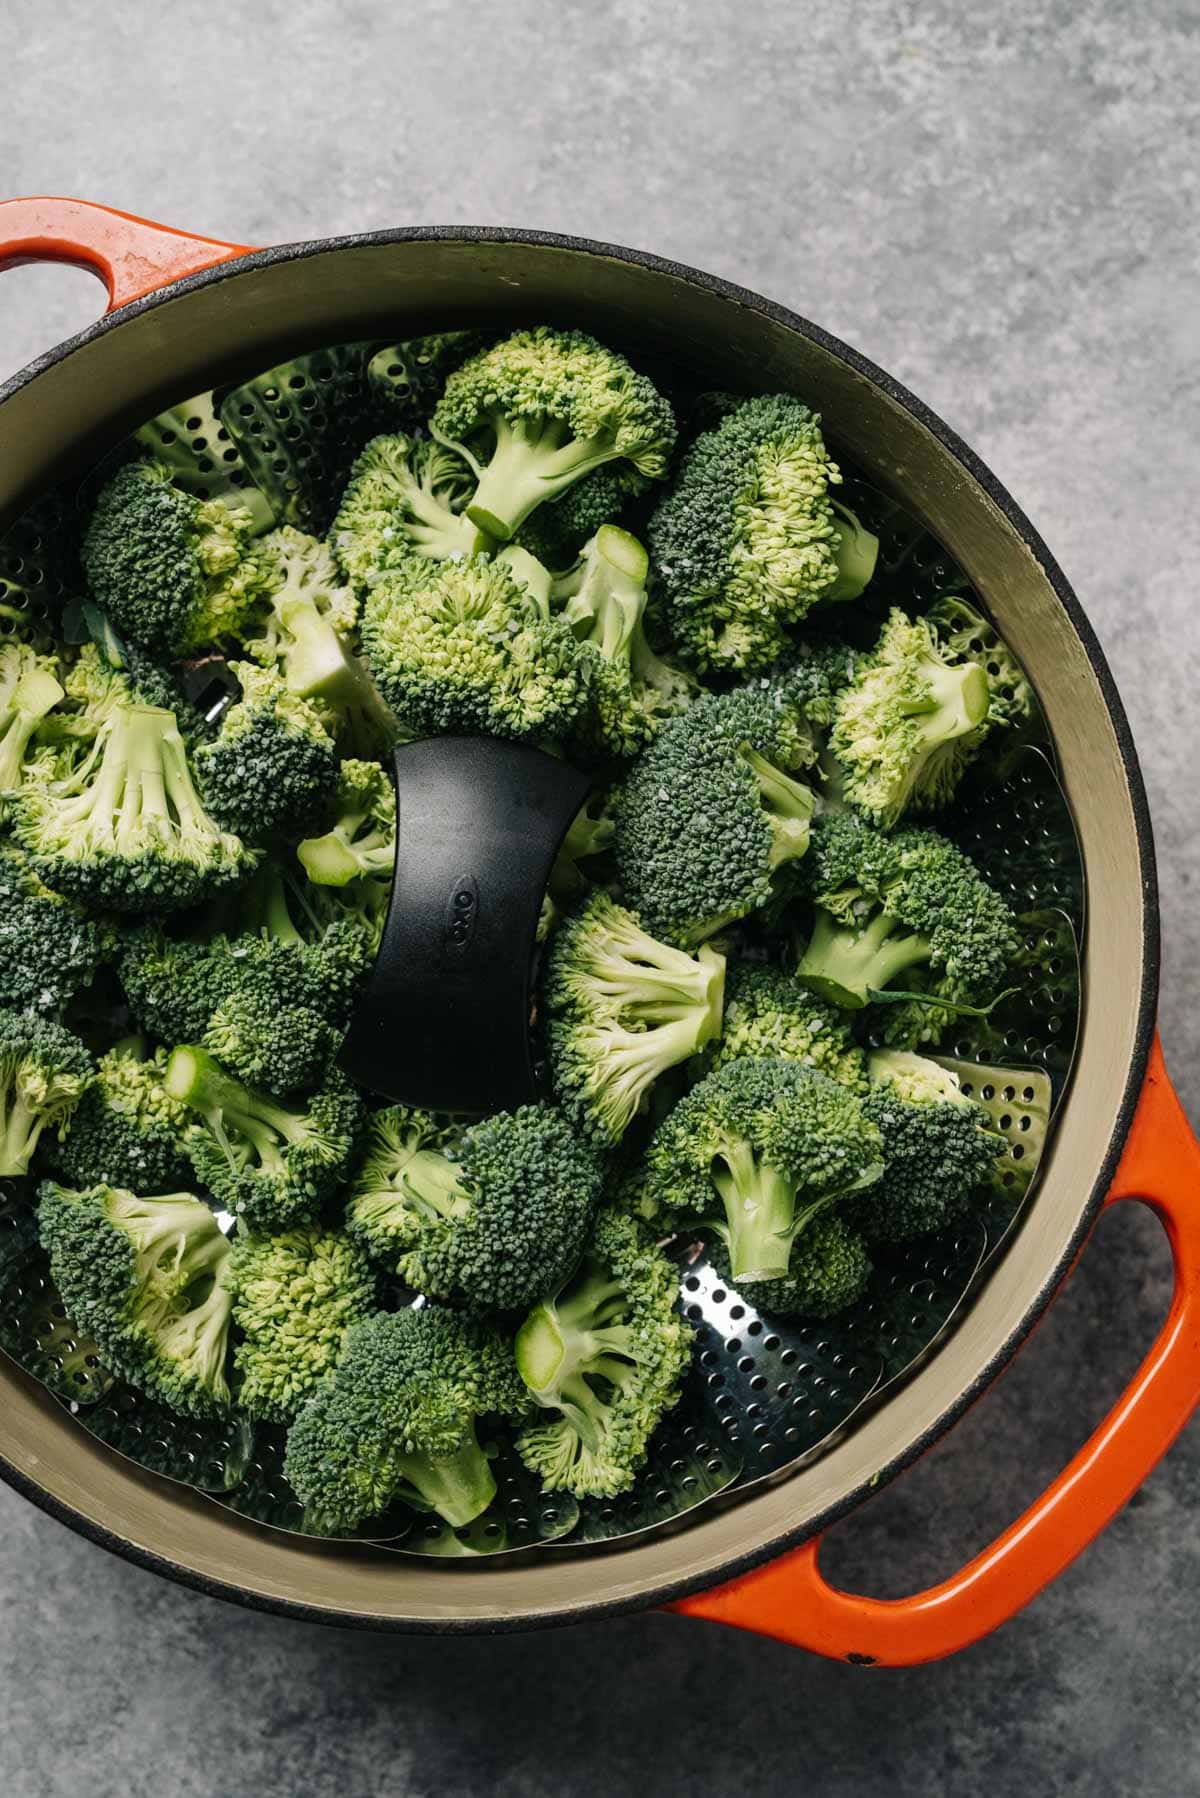 Raw broccoli florets in a steamed basket fitted into a dutch oven pot.